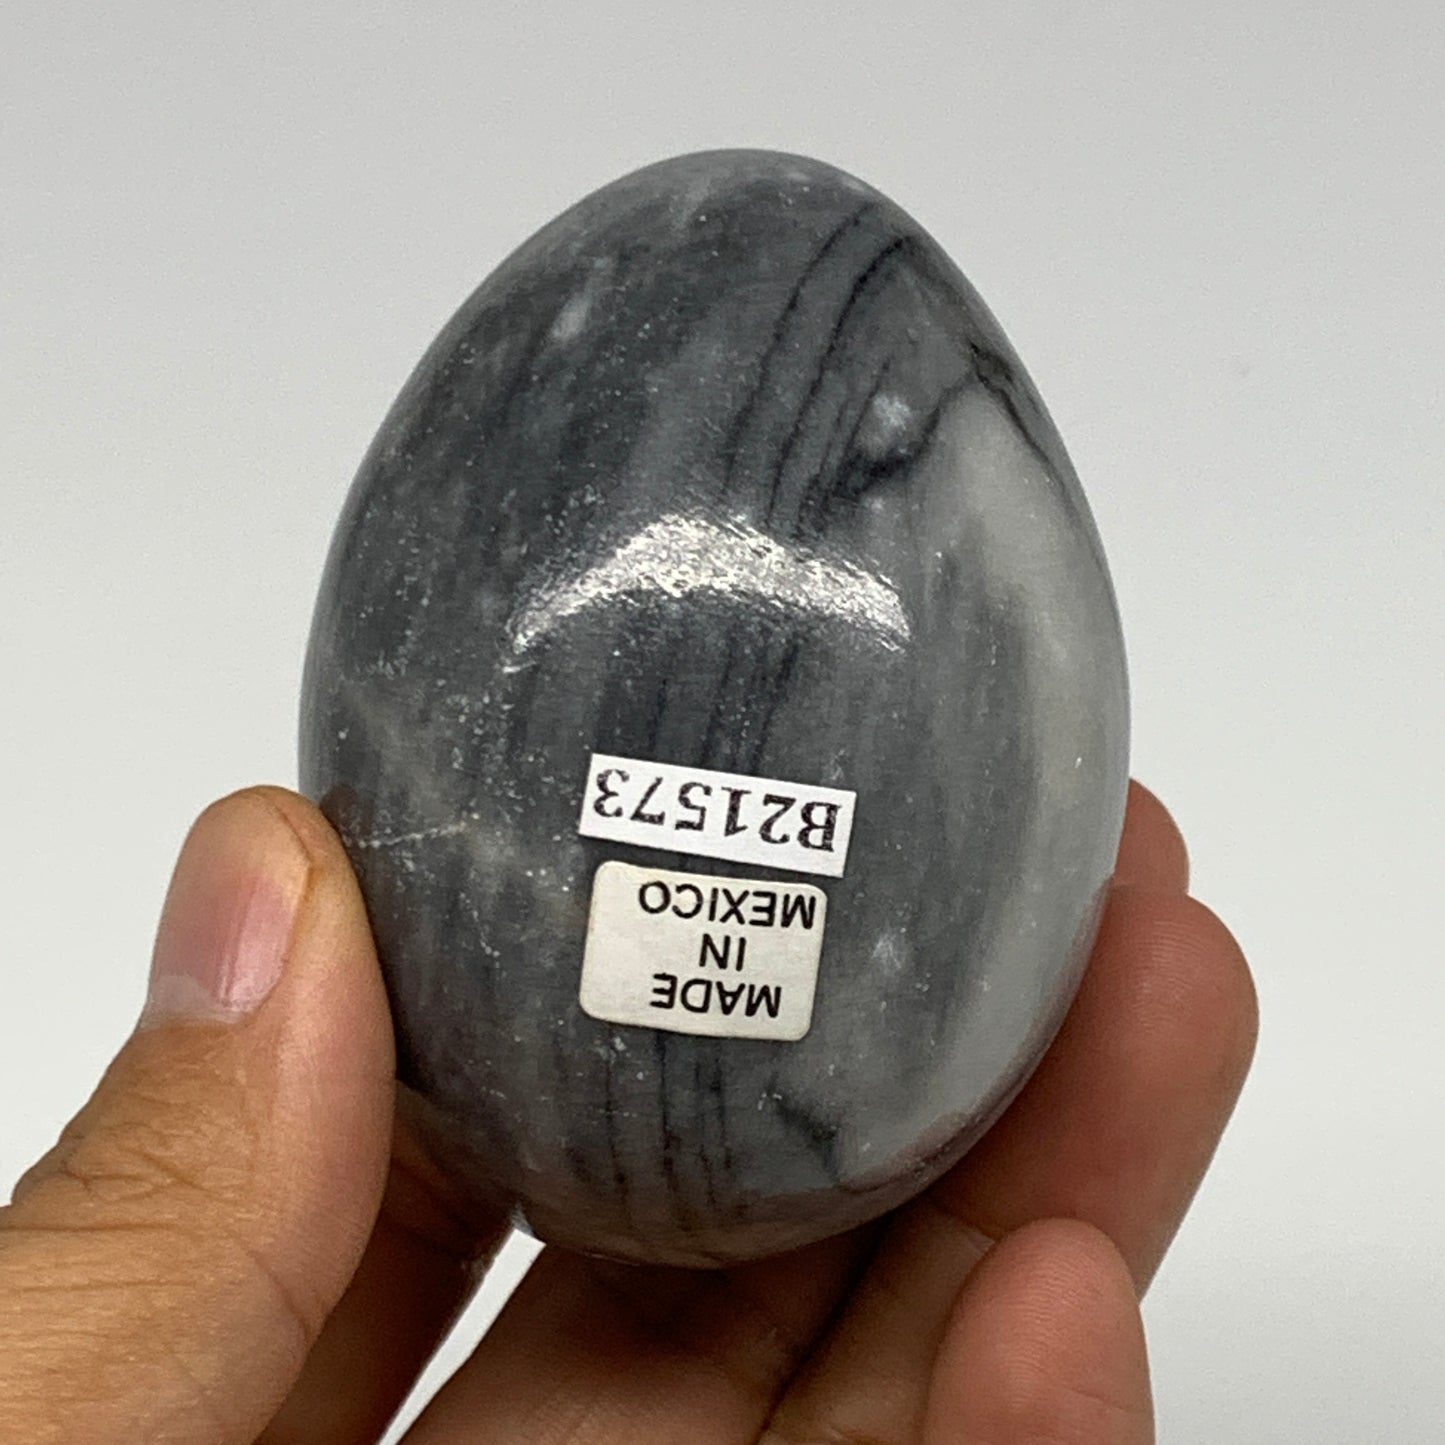 221.4g, 2.6"x1.9" Natural Gray Onyx Egg Gemstone Mineral, from Mexico, B21573